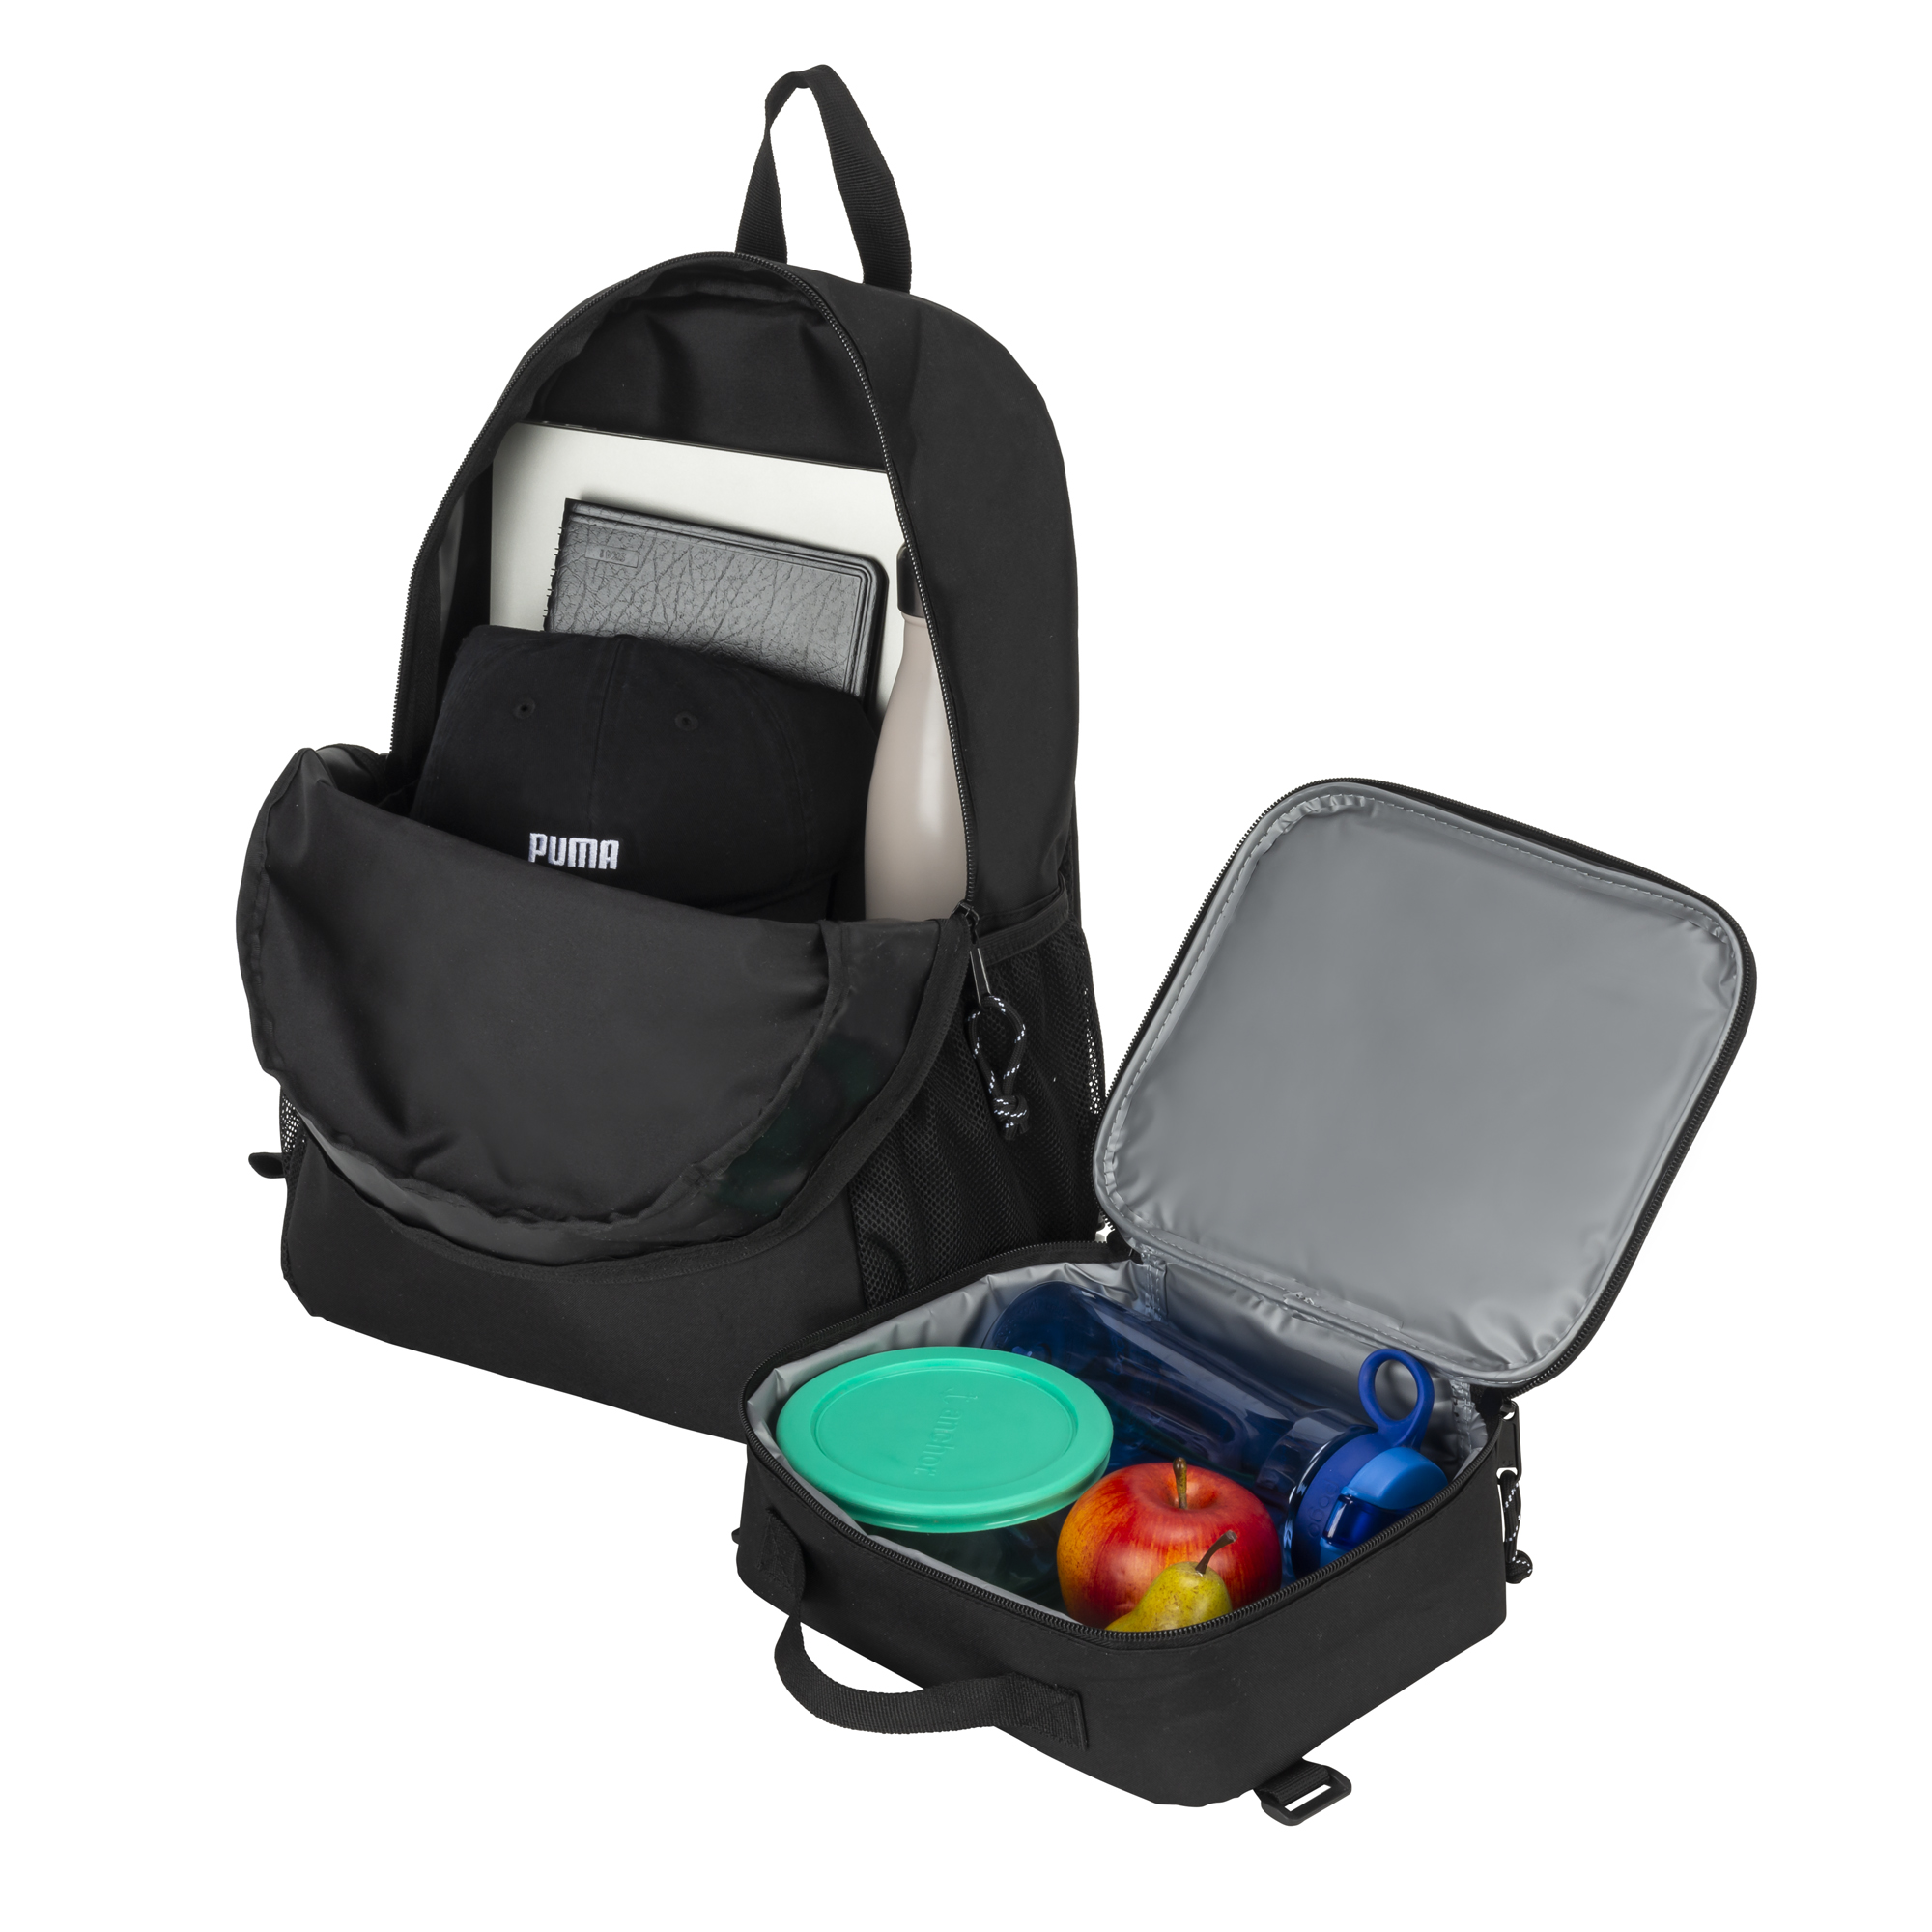 Champion Munch Backpack Lunch Kit Combo - image 3 of 3